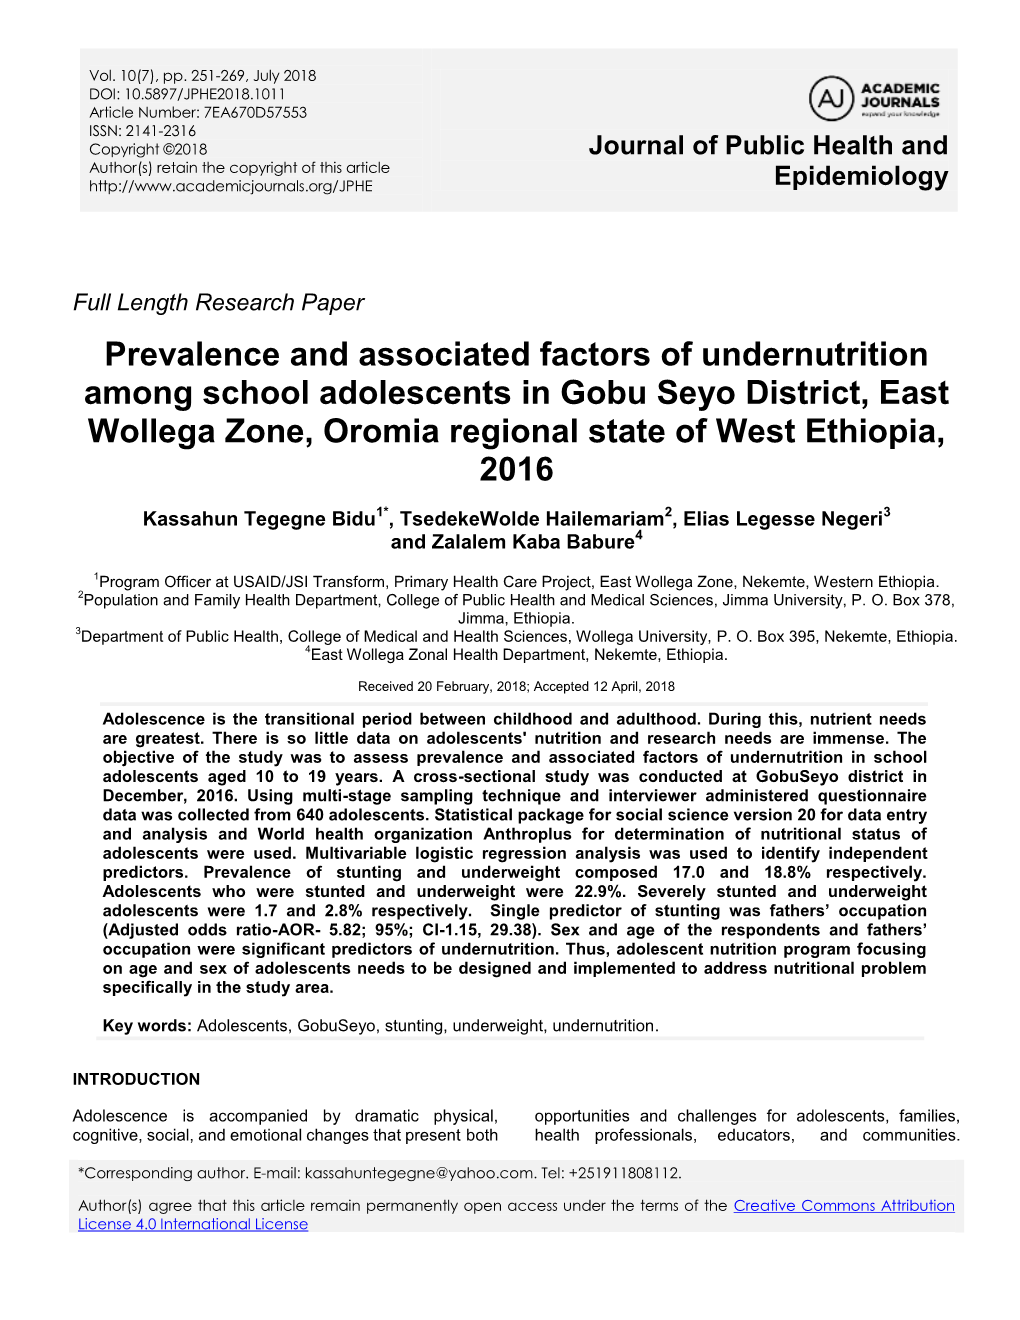 Prevalence and Associated Factors of Undernutrition Among School Adolescents in Gobu Seyo District, East Wollega Zone, Oromia Regional State of West Ethiopia, 2016